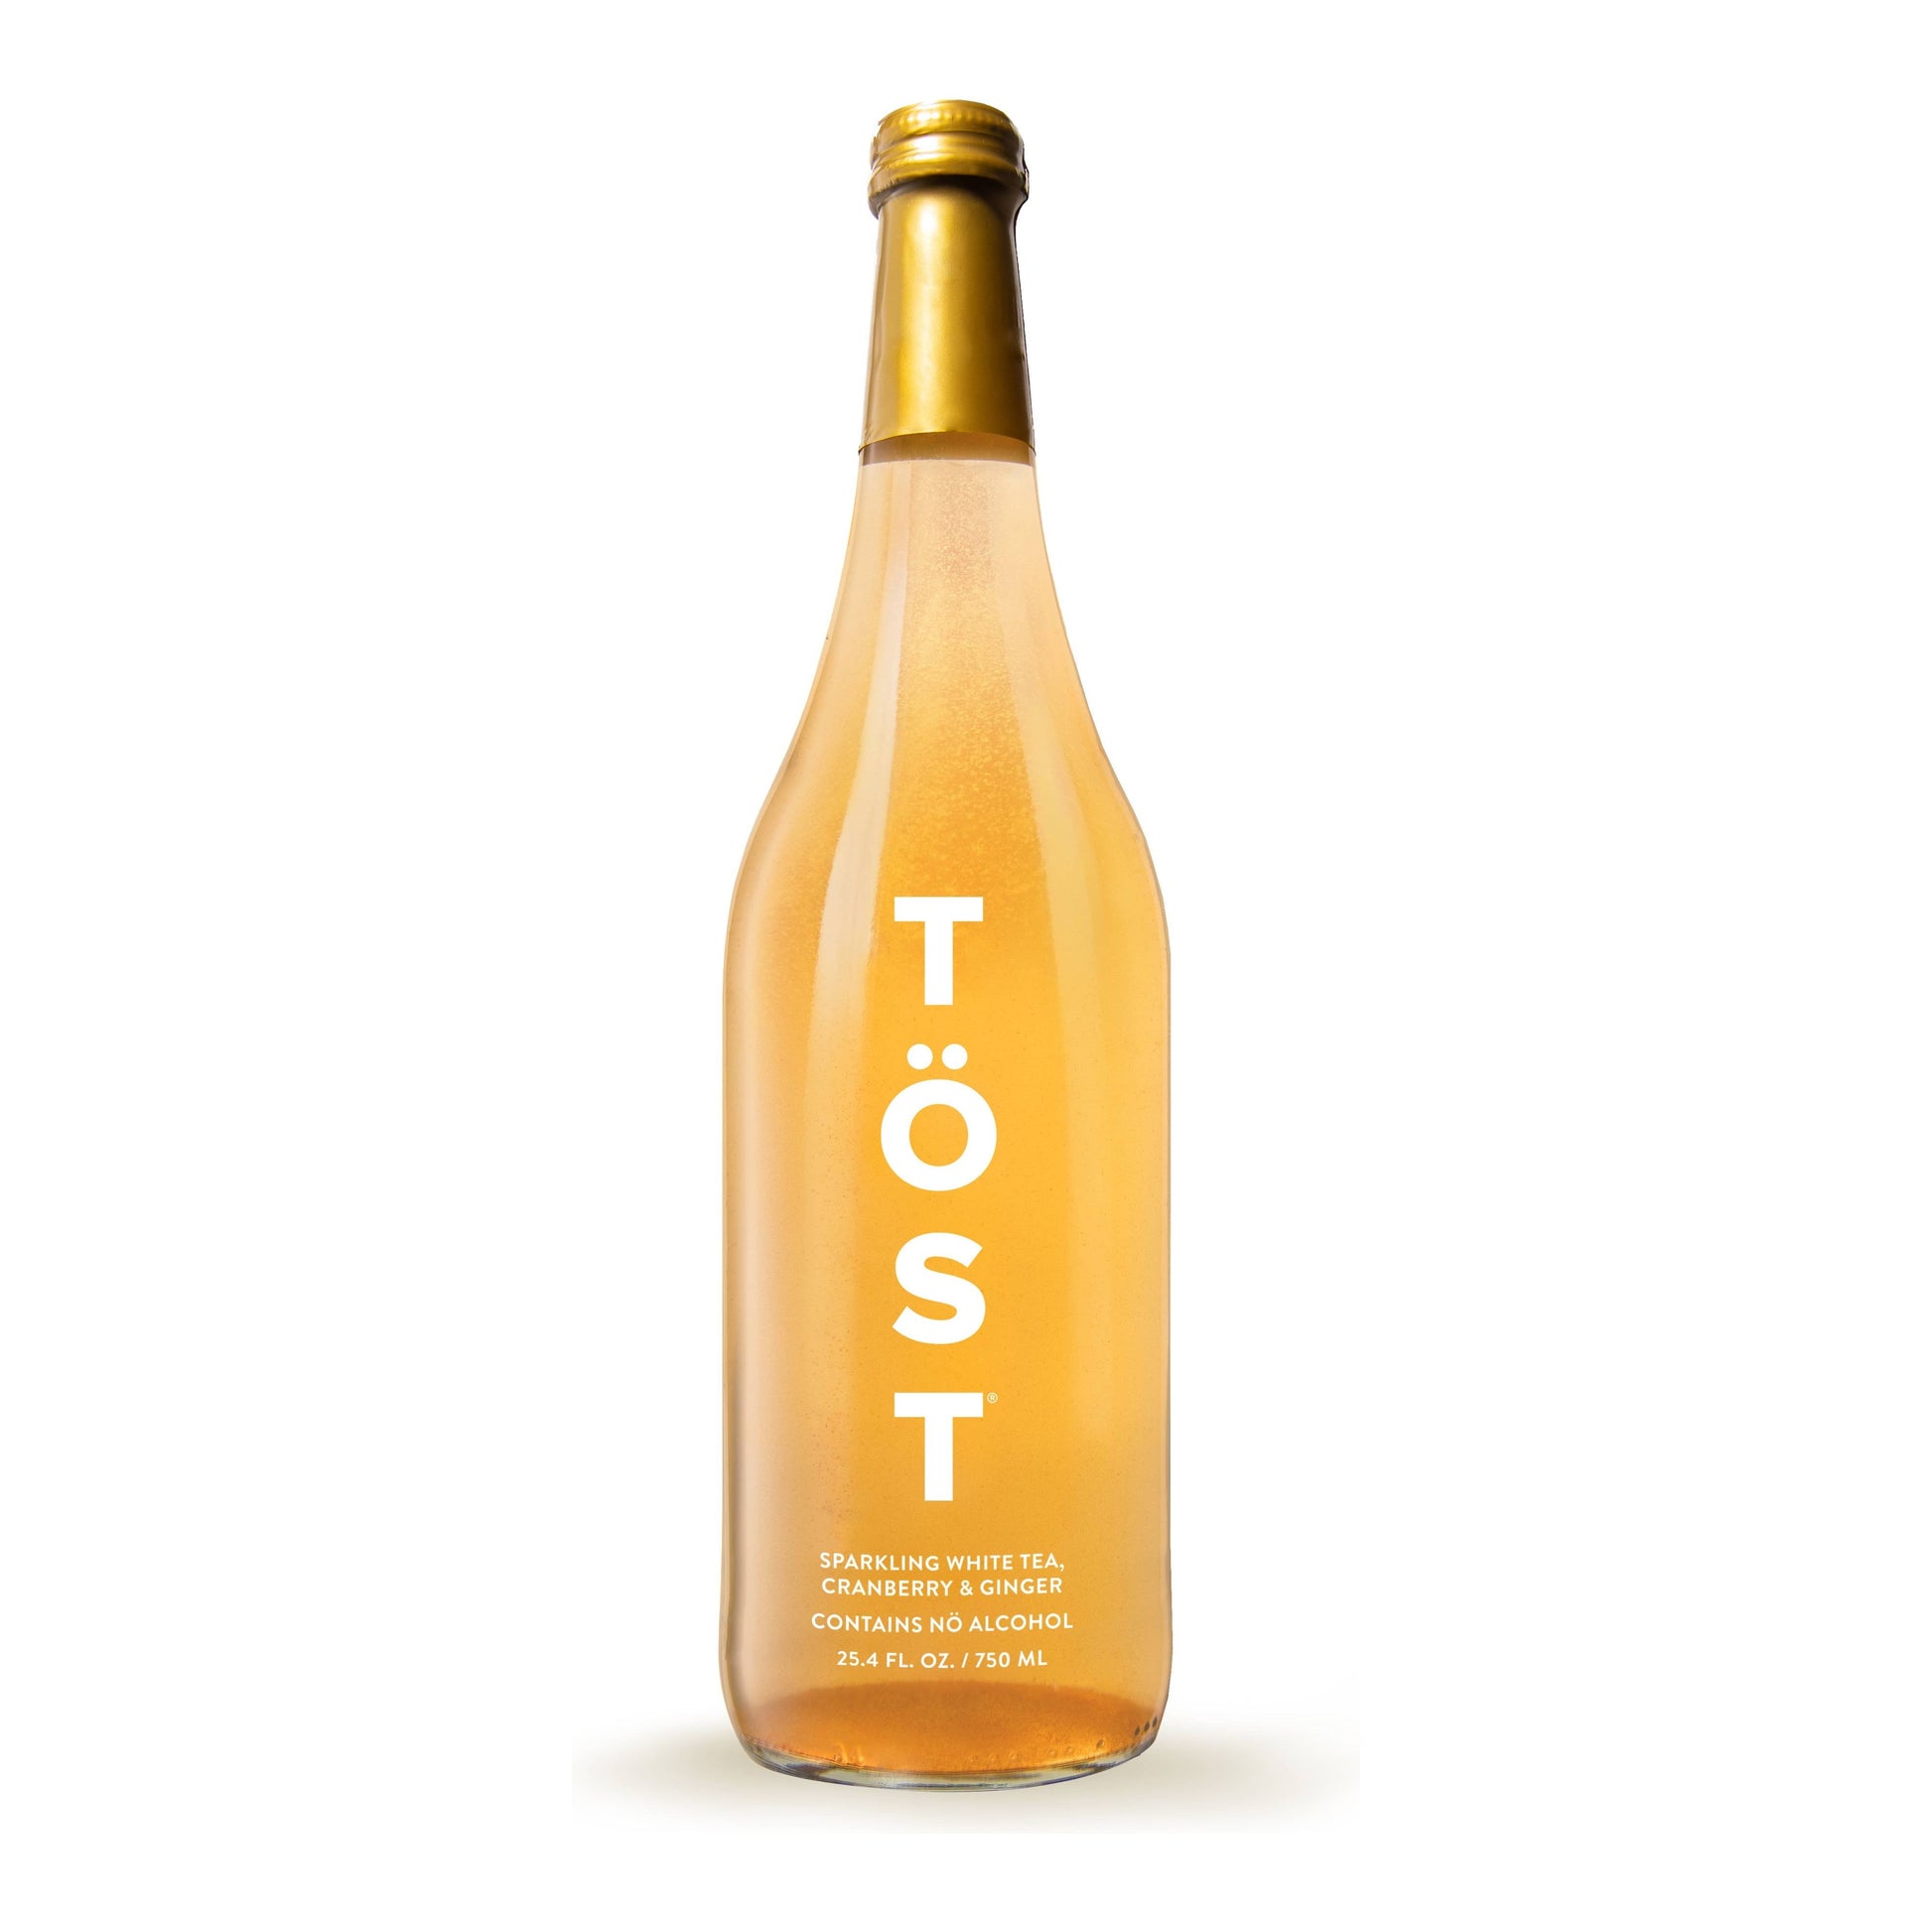 A bottle of TÖST a Non Alcoholic Refresher, a non-alcoholic sparkling white tea beverage containing white cranberry, standing upright against a white background.